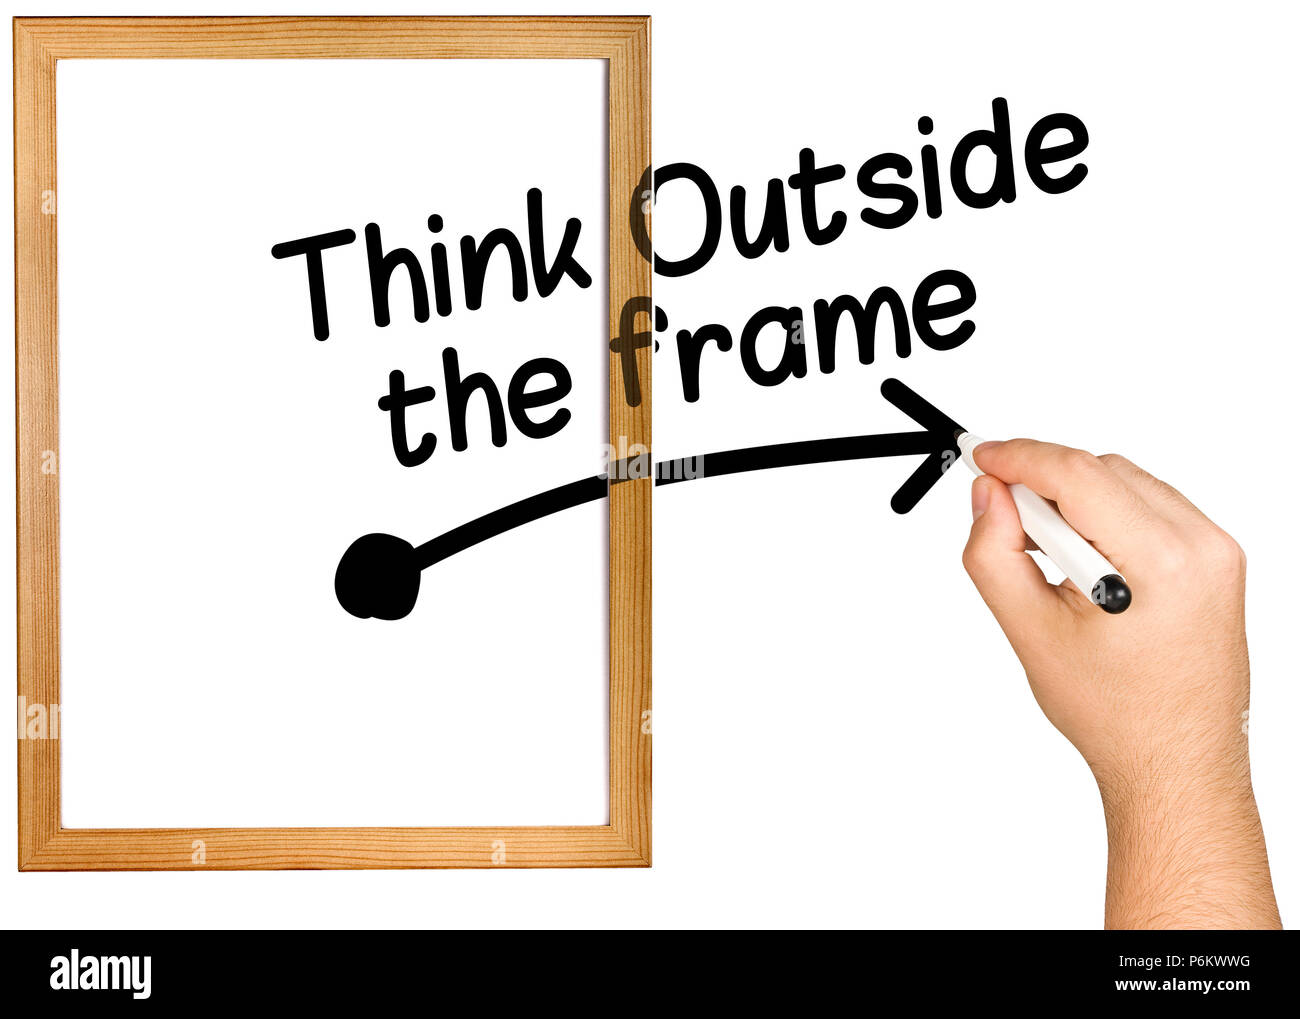 Hand Writing Think Outside the Frame on Whiteboard Stock Photo